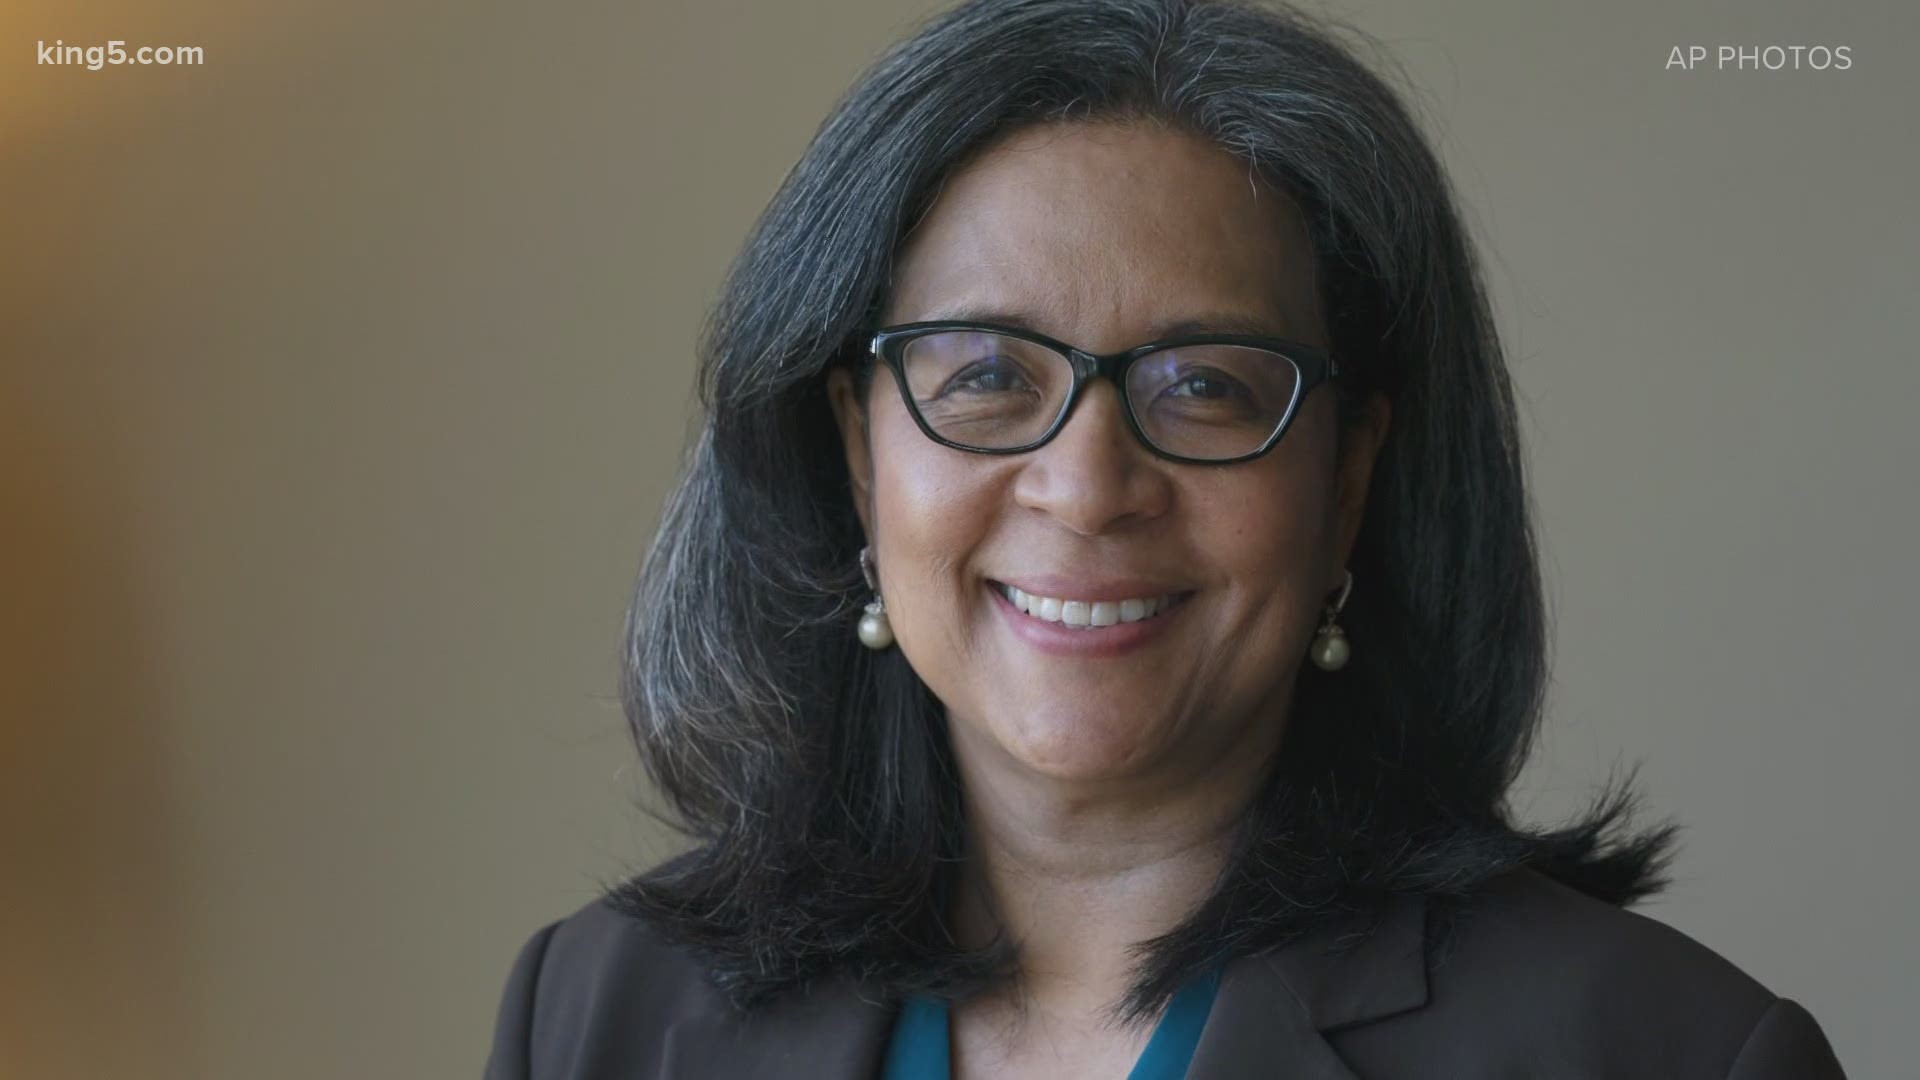 The former Tacoma mayor heads to D.C. as the Pacific Northwest's first Black U.S. Representative as well as the first Korean-American woman ever seated in Congress